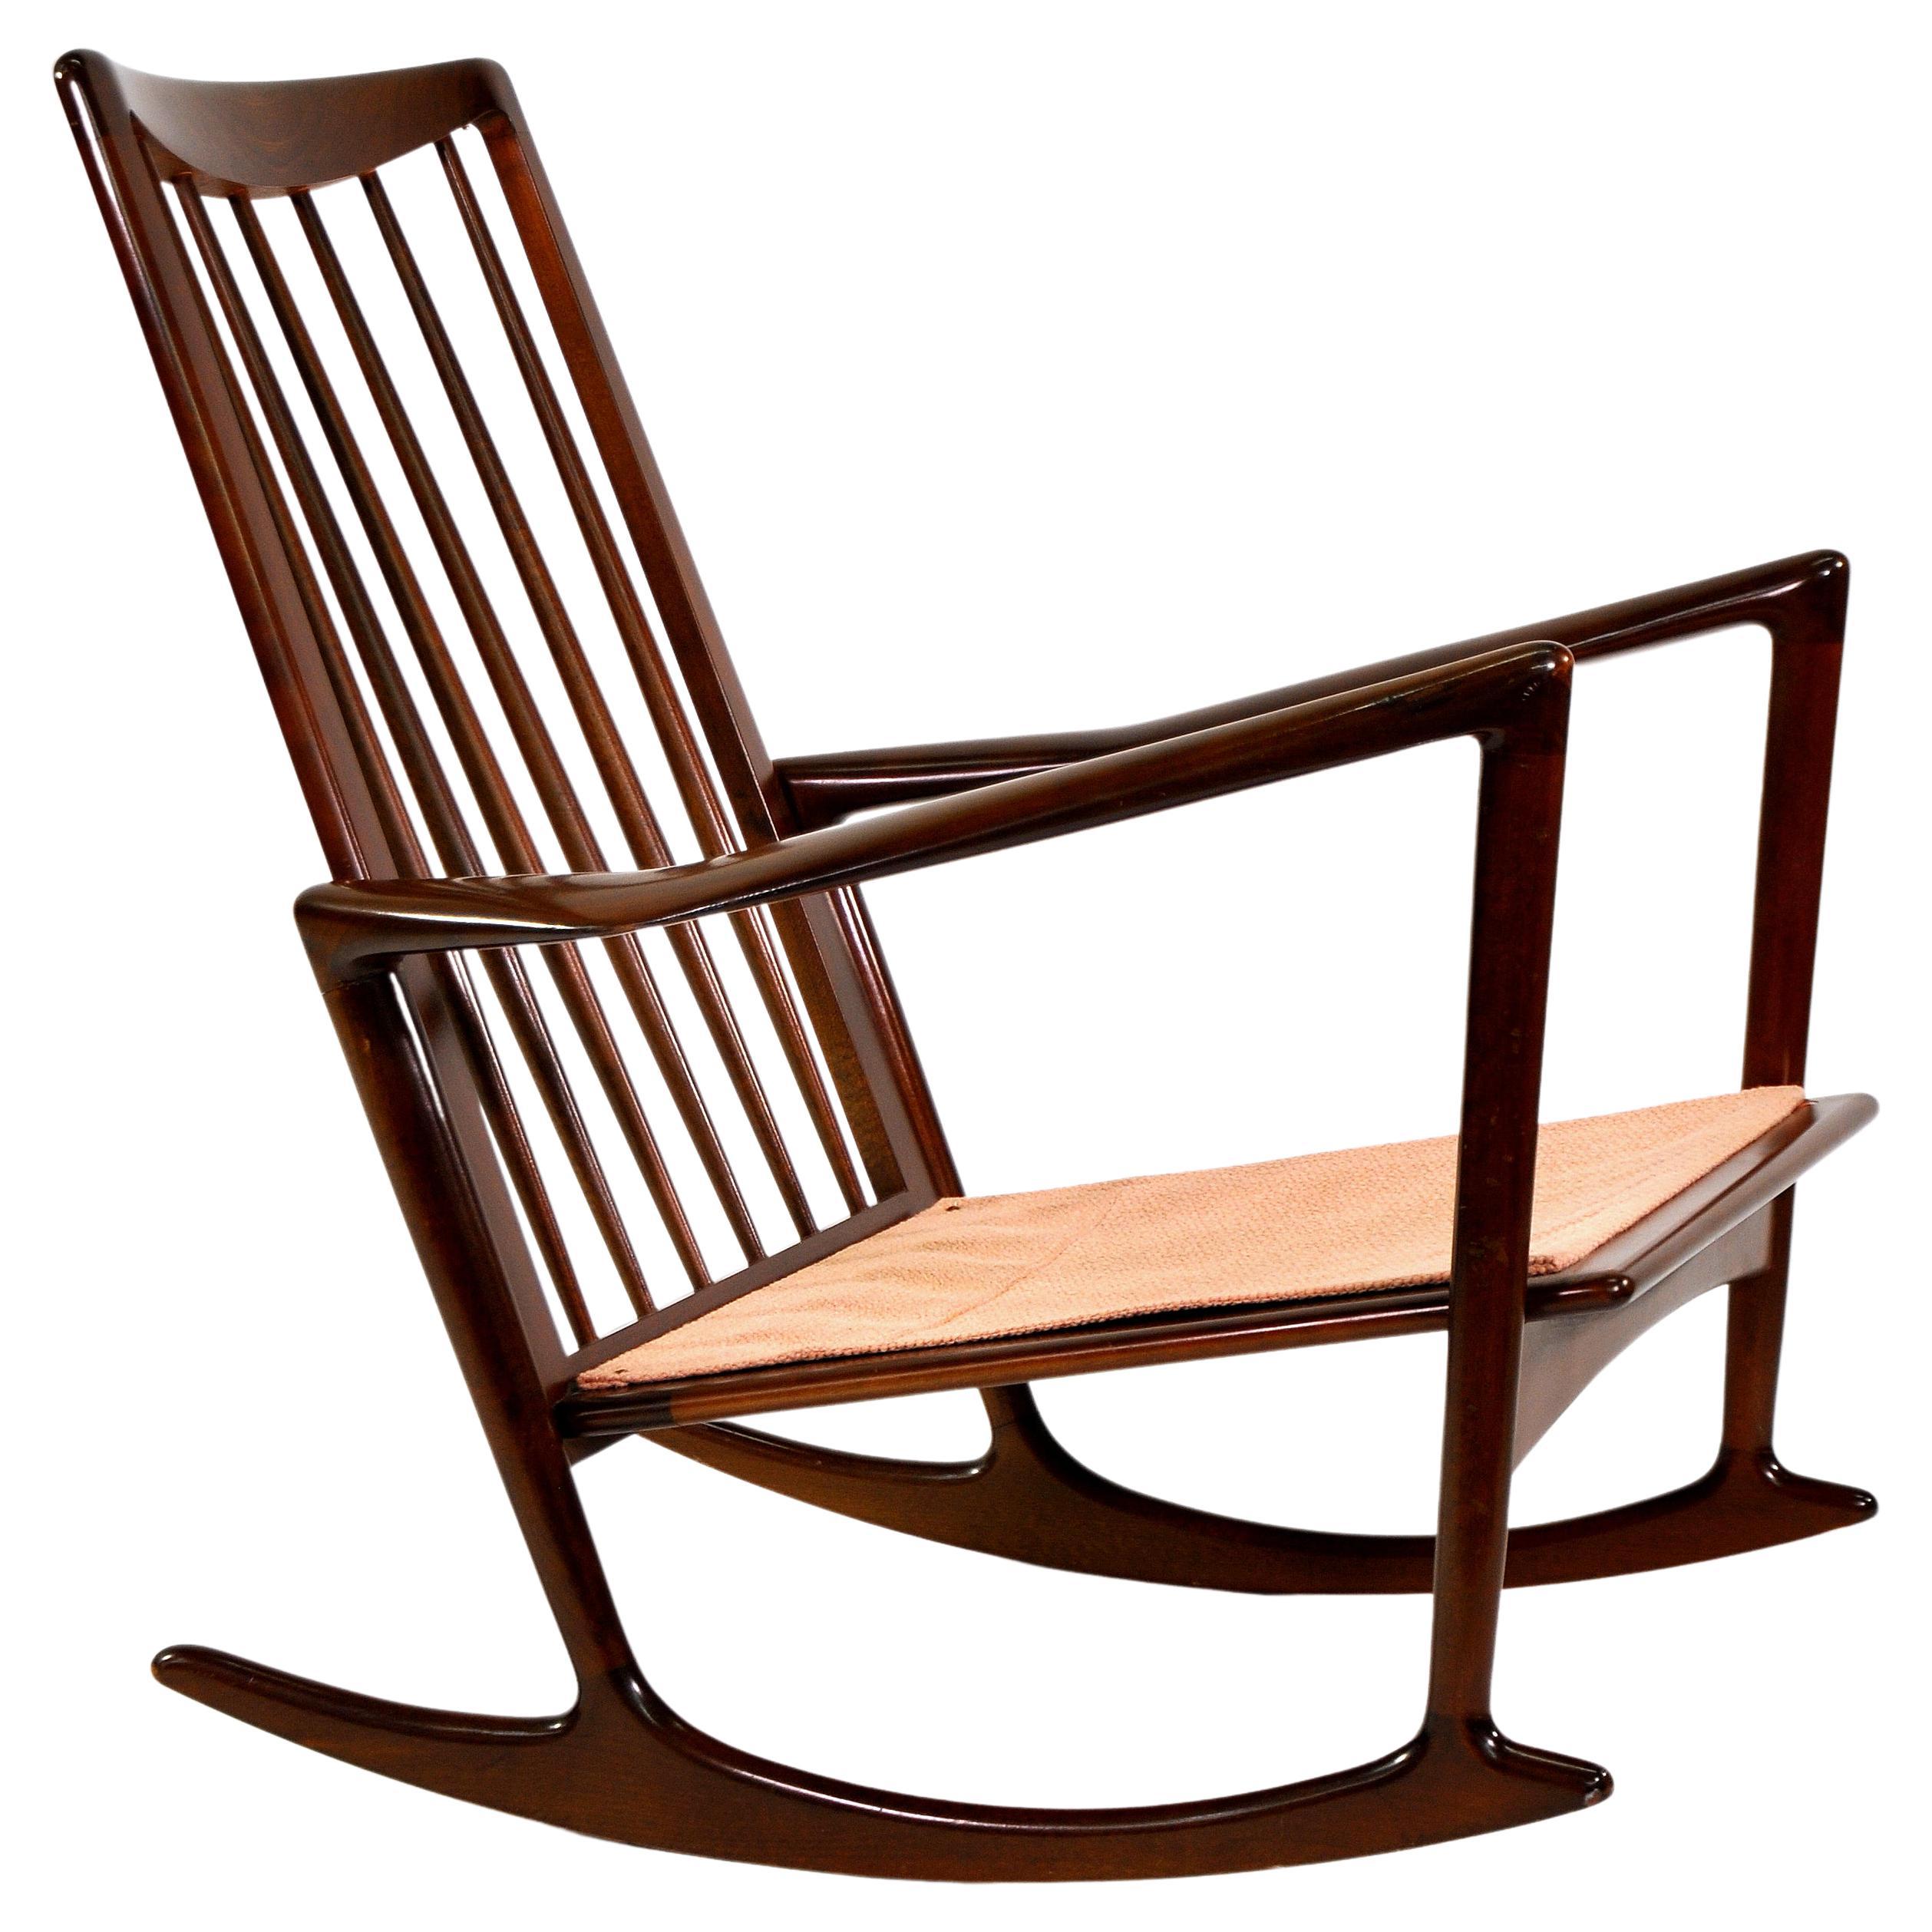 Fabric Ib Kofod-Larsen Sculptural Rocking Chair for Selig, Denmark, 1960s For Sale